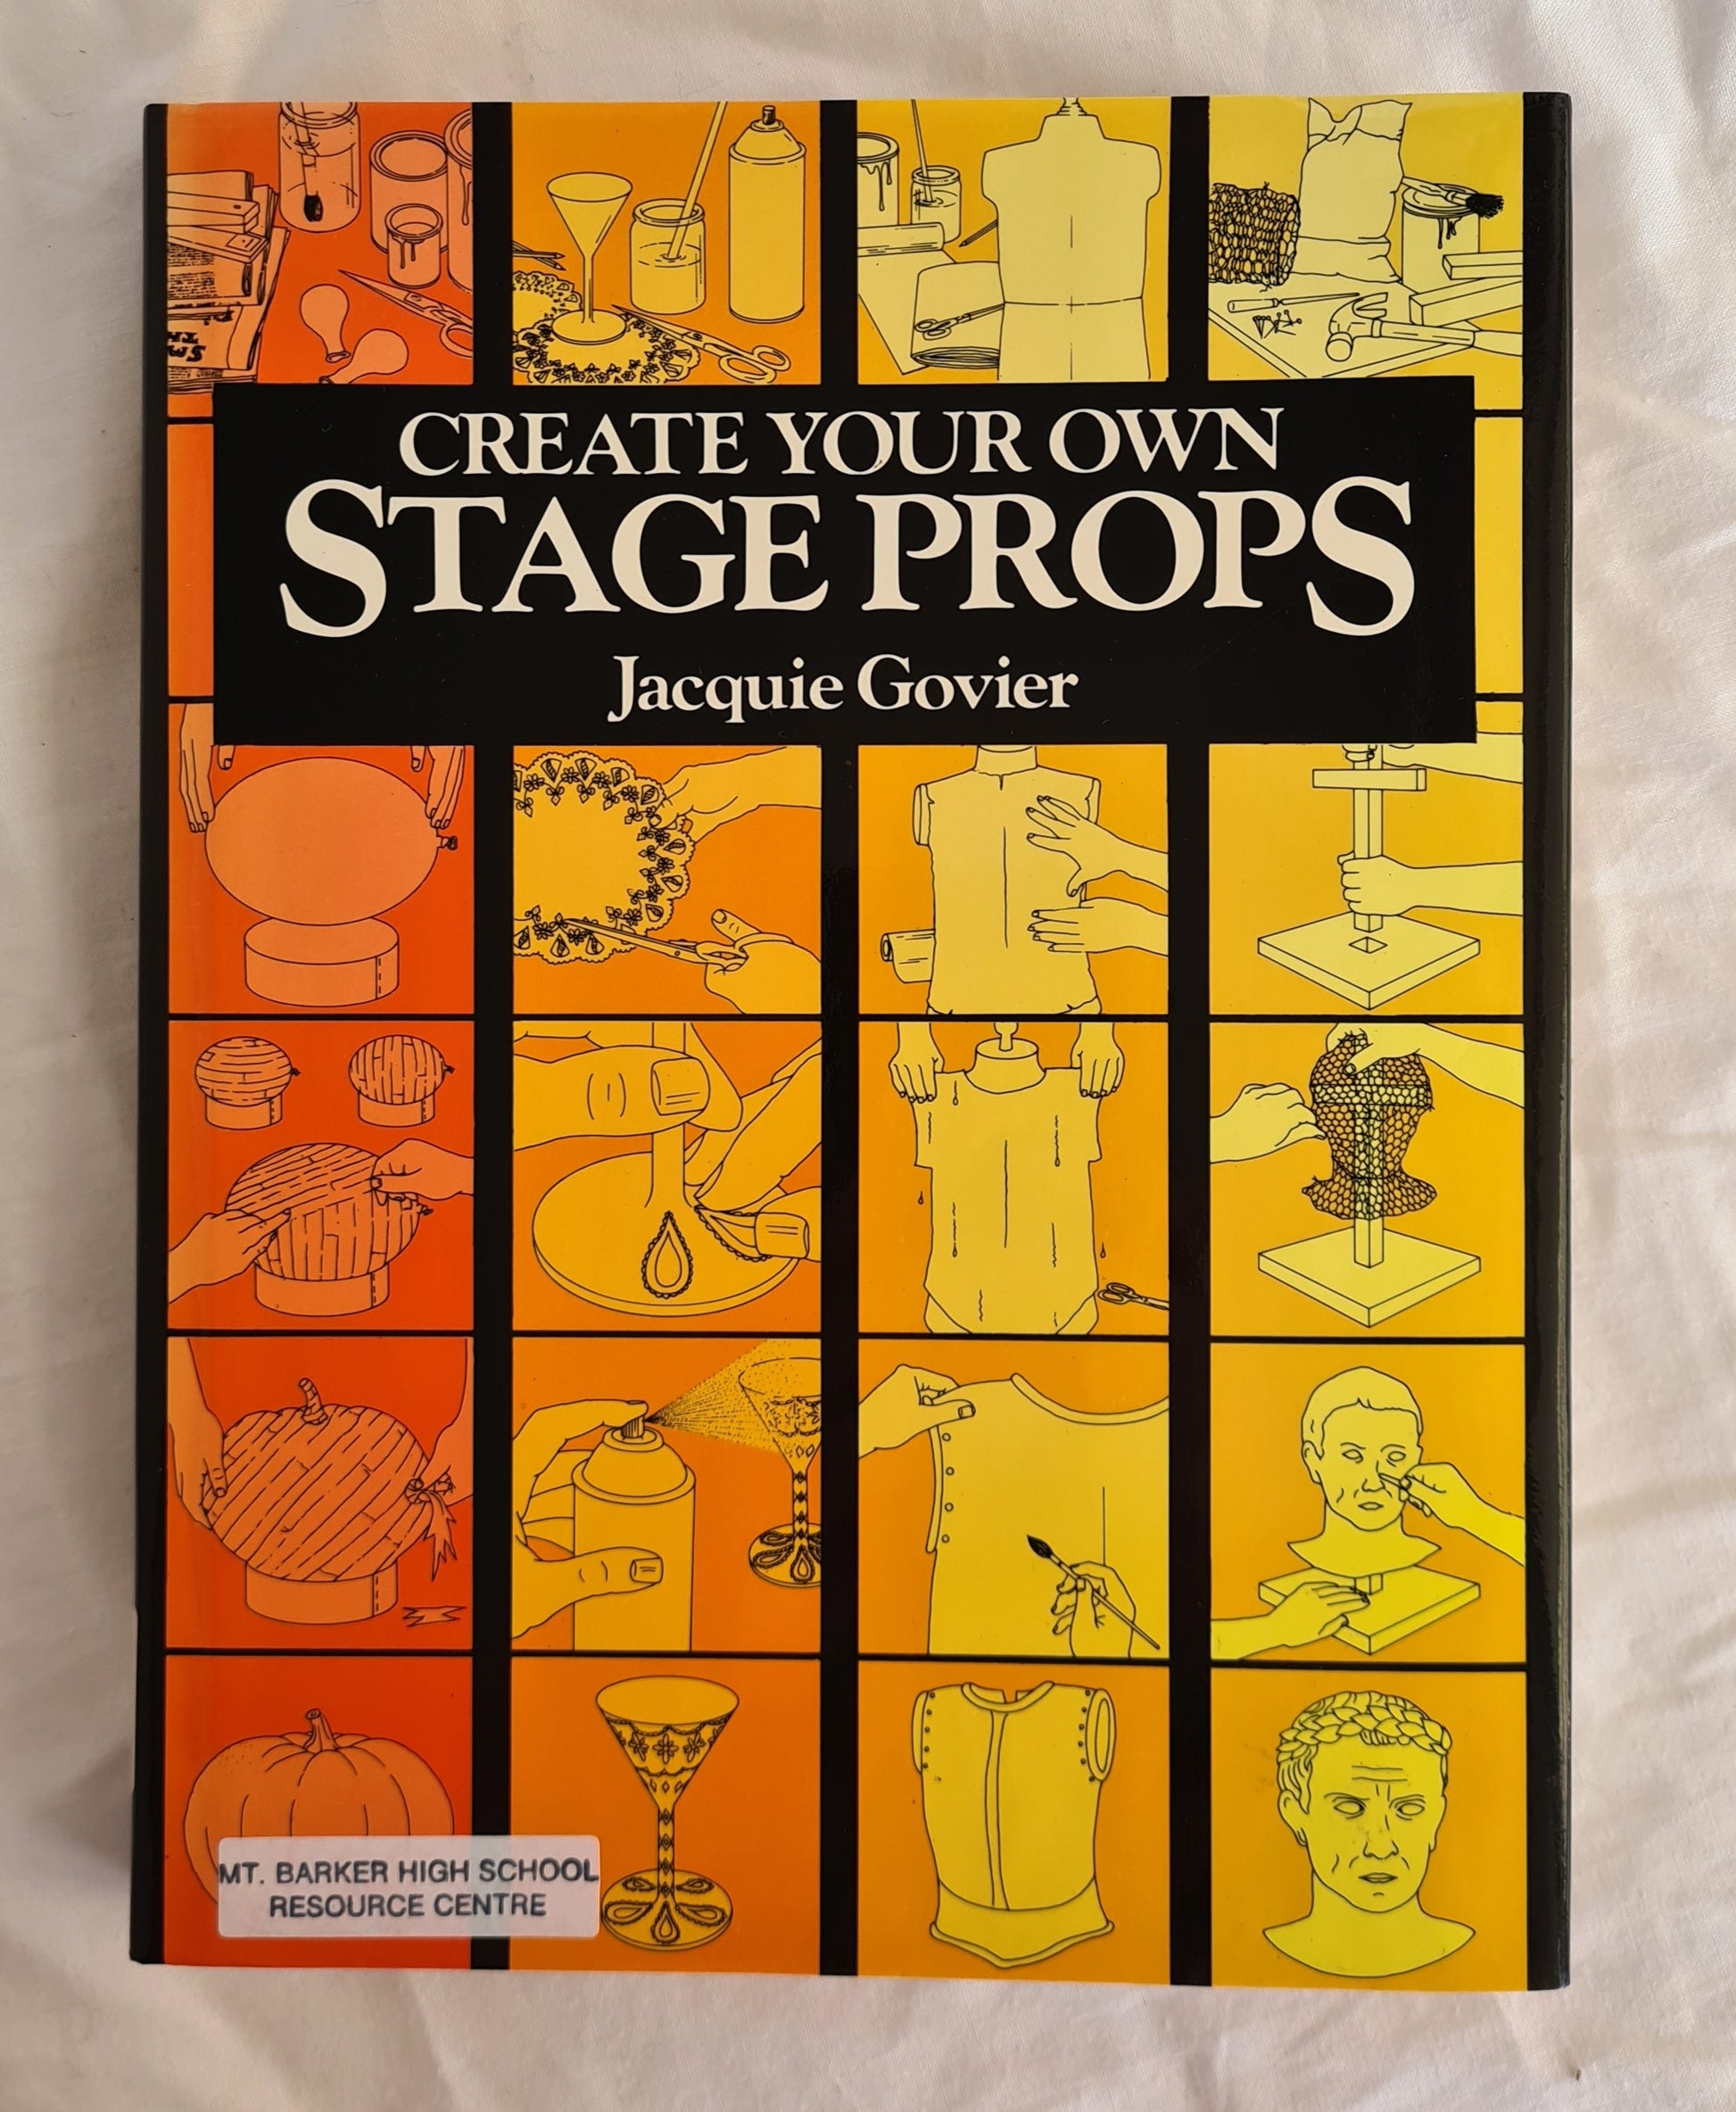 Create Your Own Stage Props by Jacquie Govier